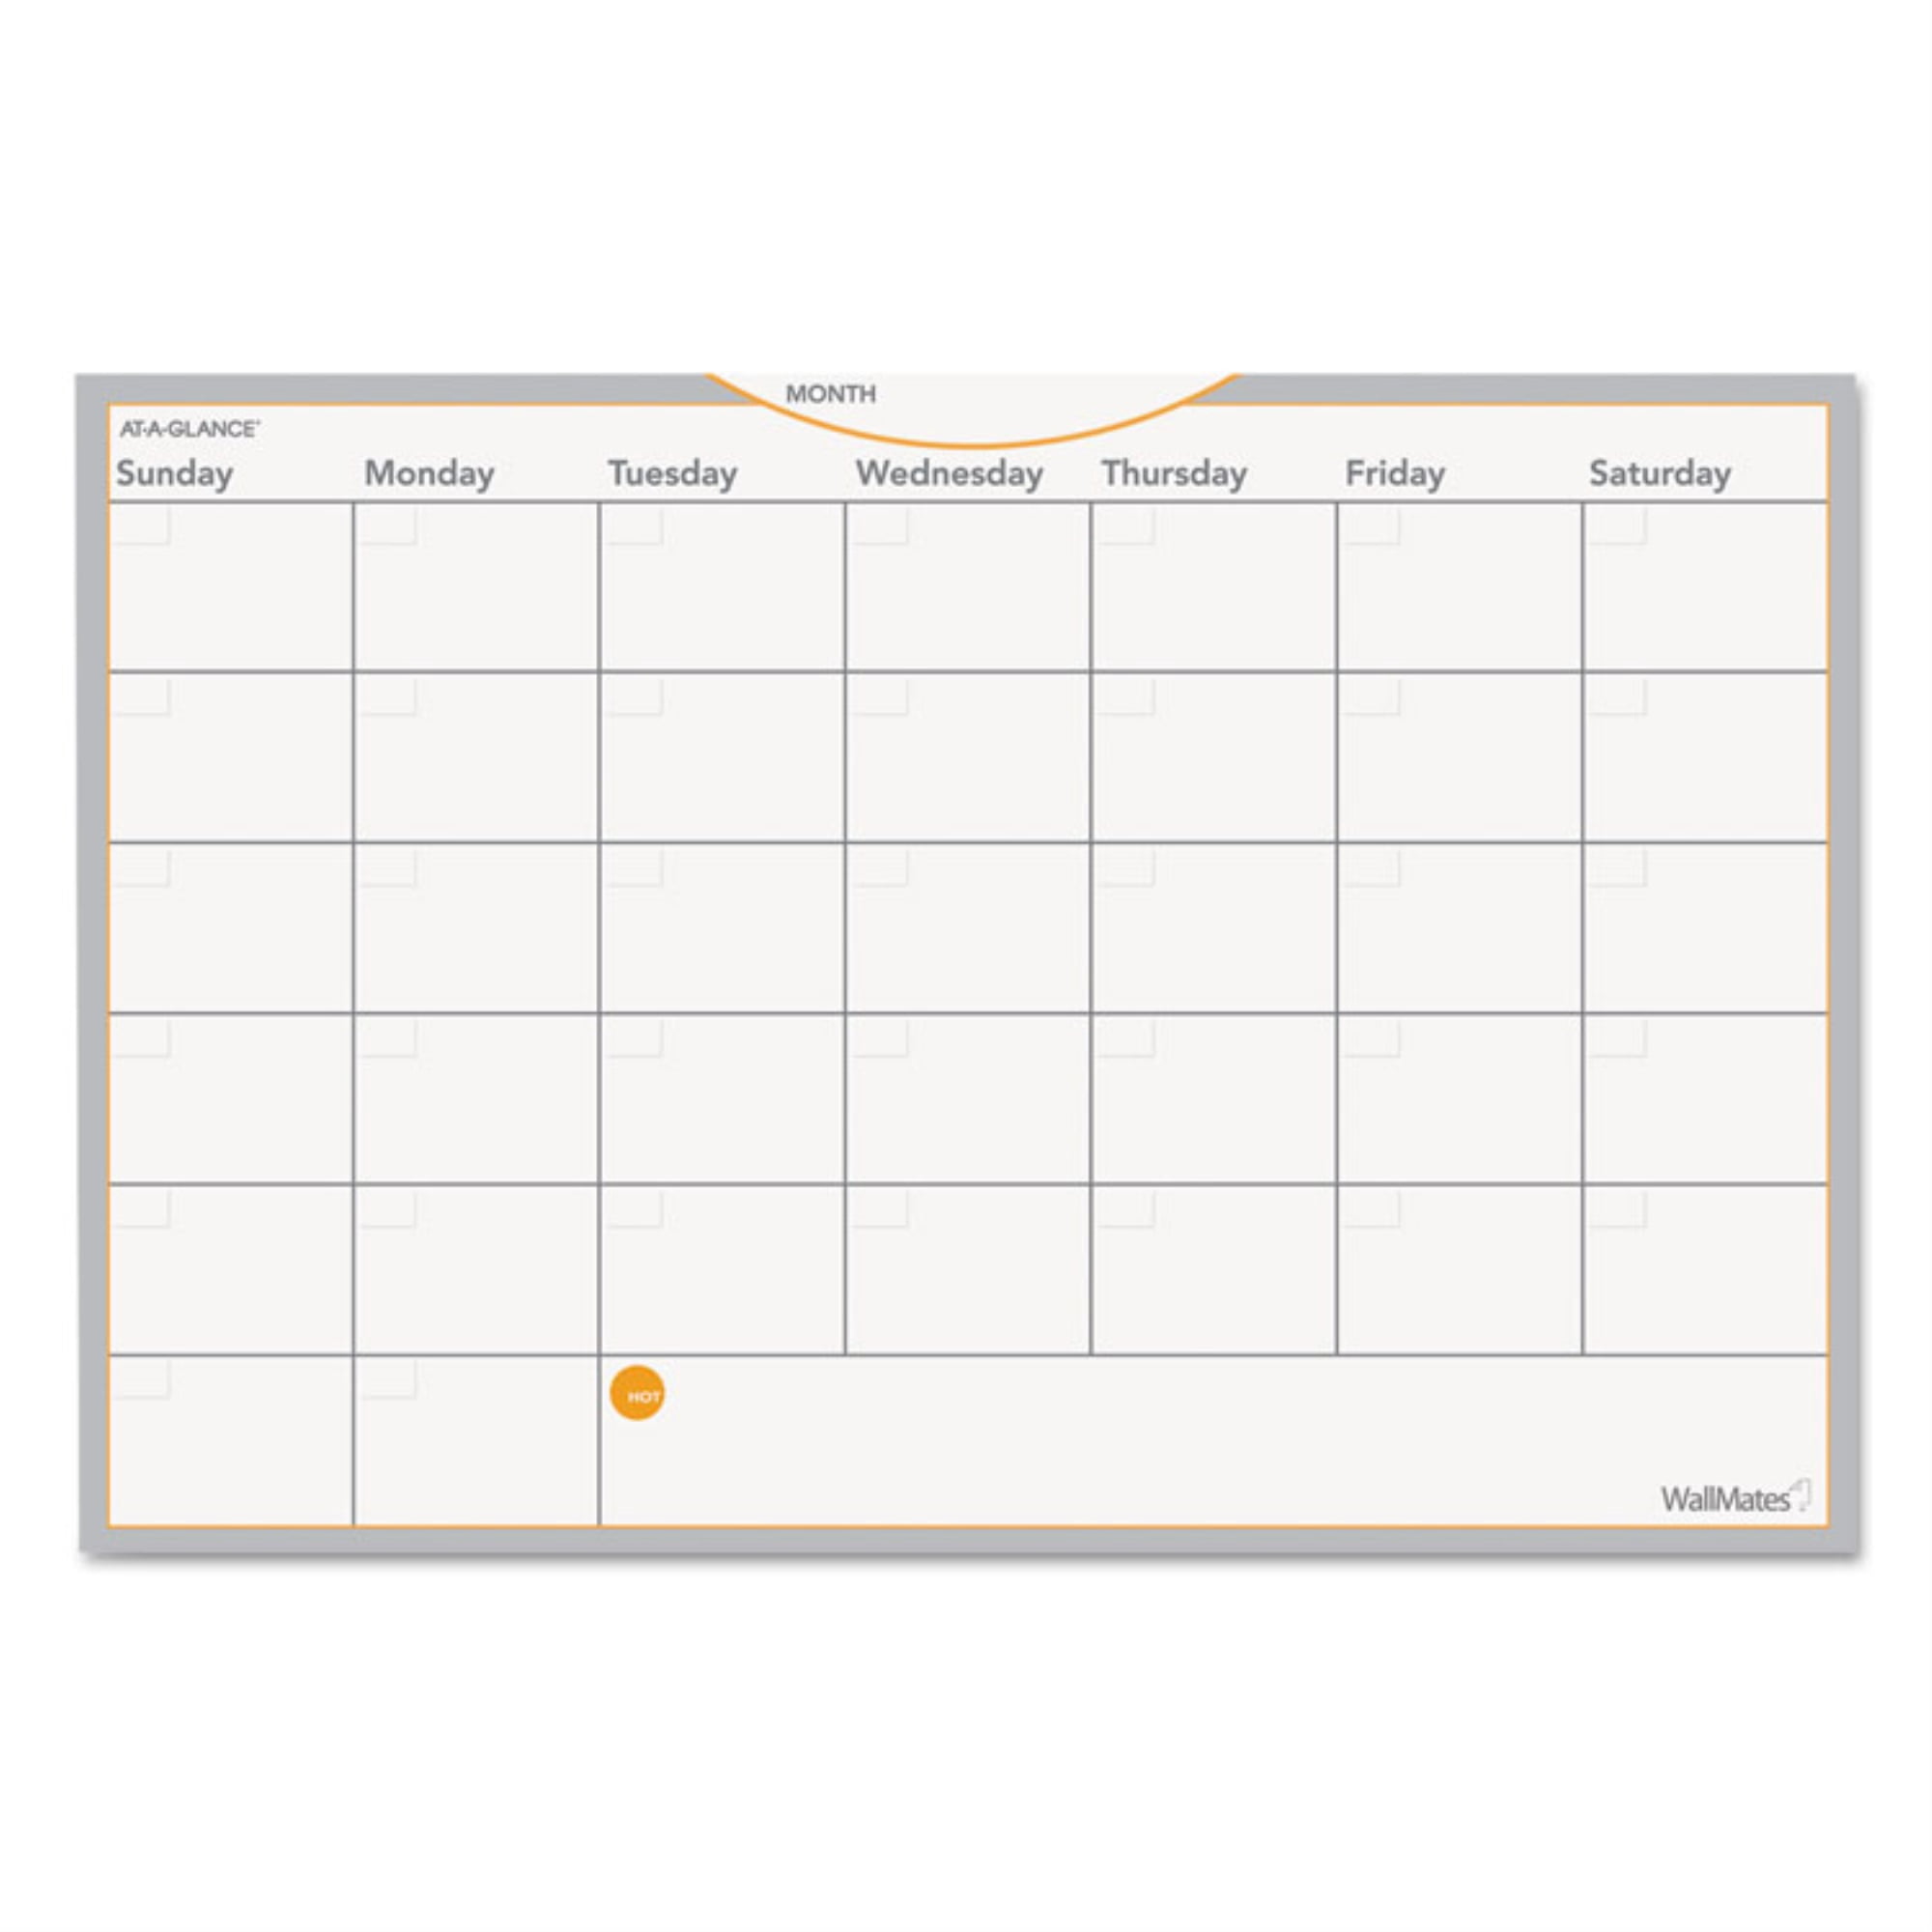 AT-A-GLANCE AW602028 WallMates Self-Adhesive Dry Erase Monthly Planning Surface 36 x 24